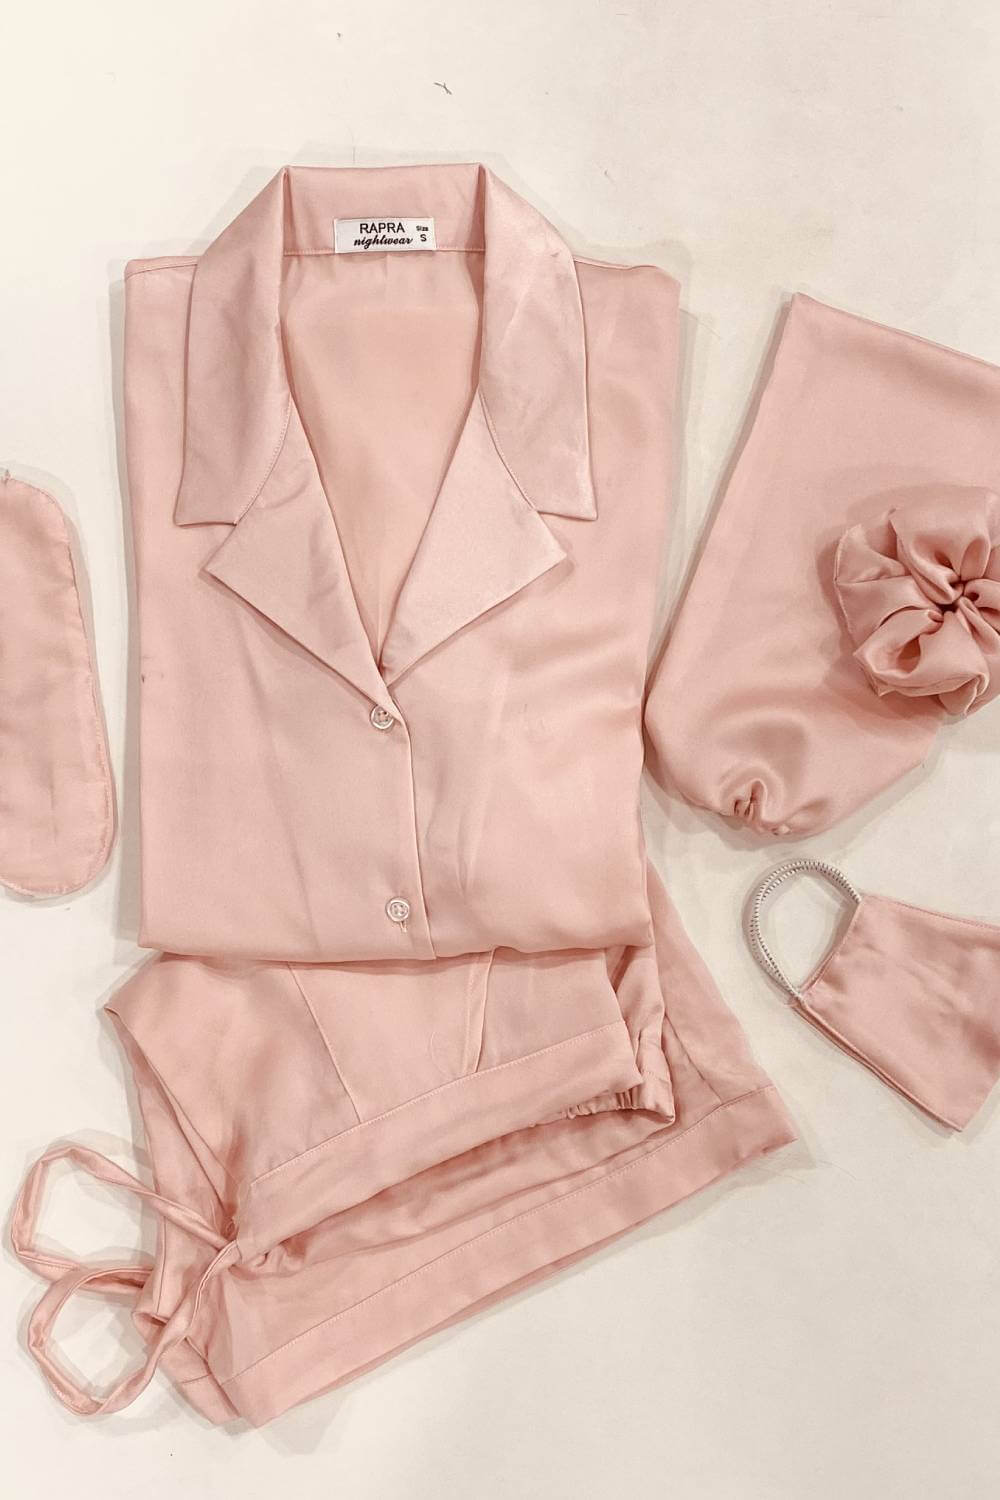 LUXE SATIN COMPLETE SET WITH ACCESSORIES